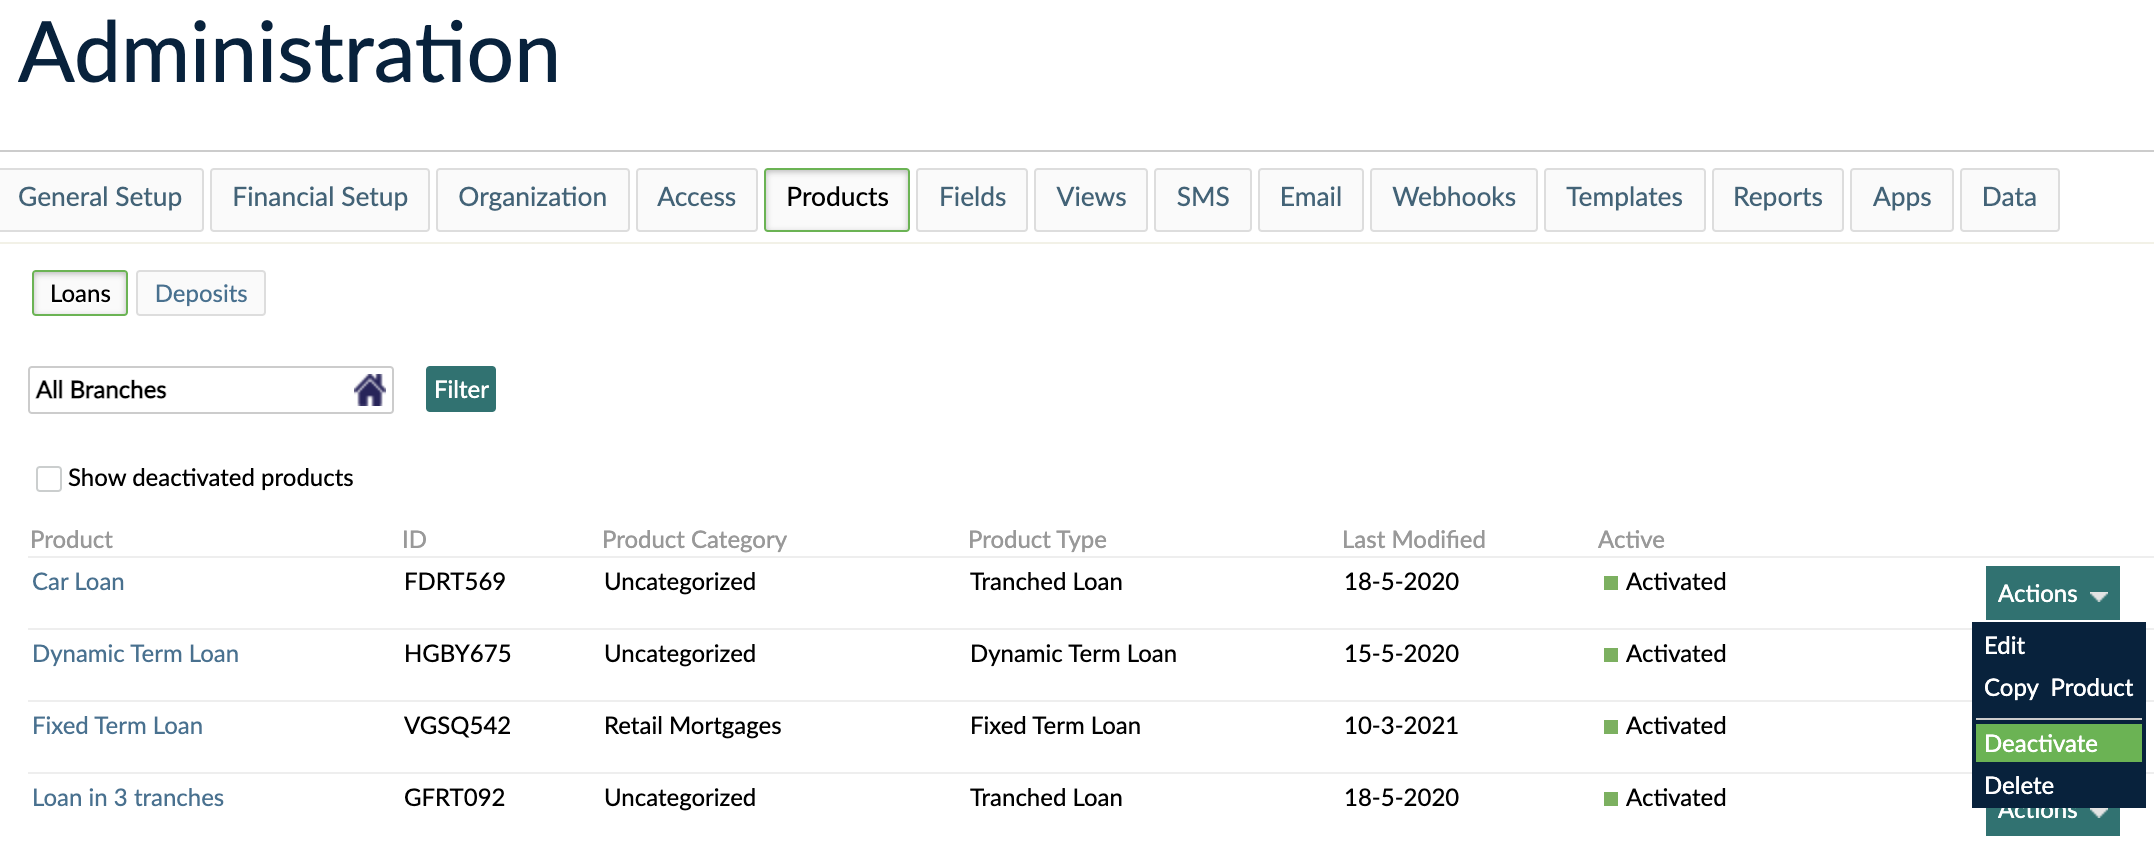 List of Loan products showing the Activate option under Actions